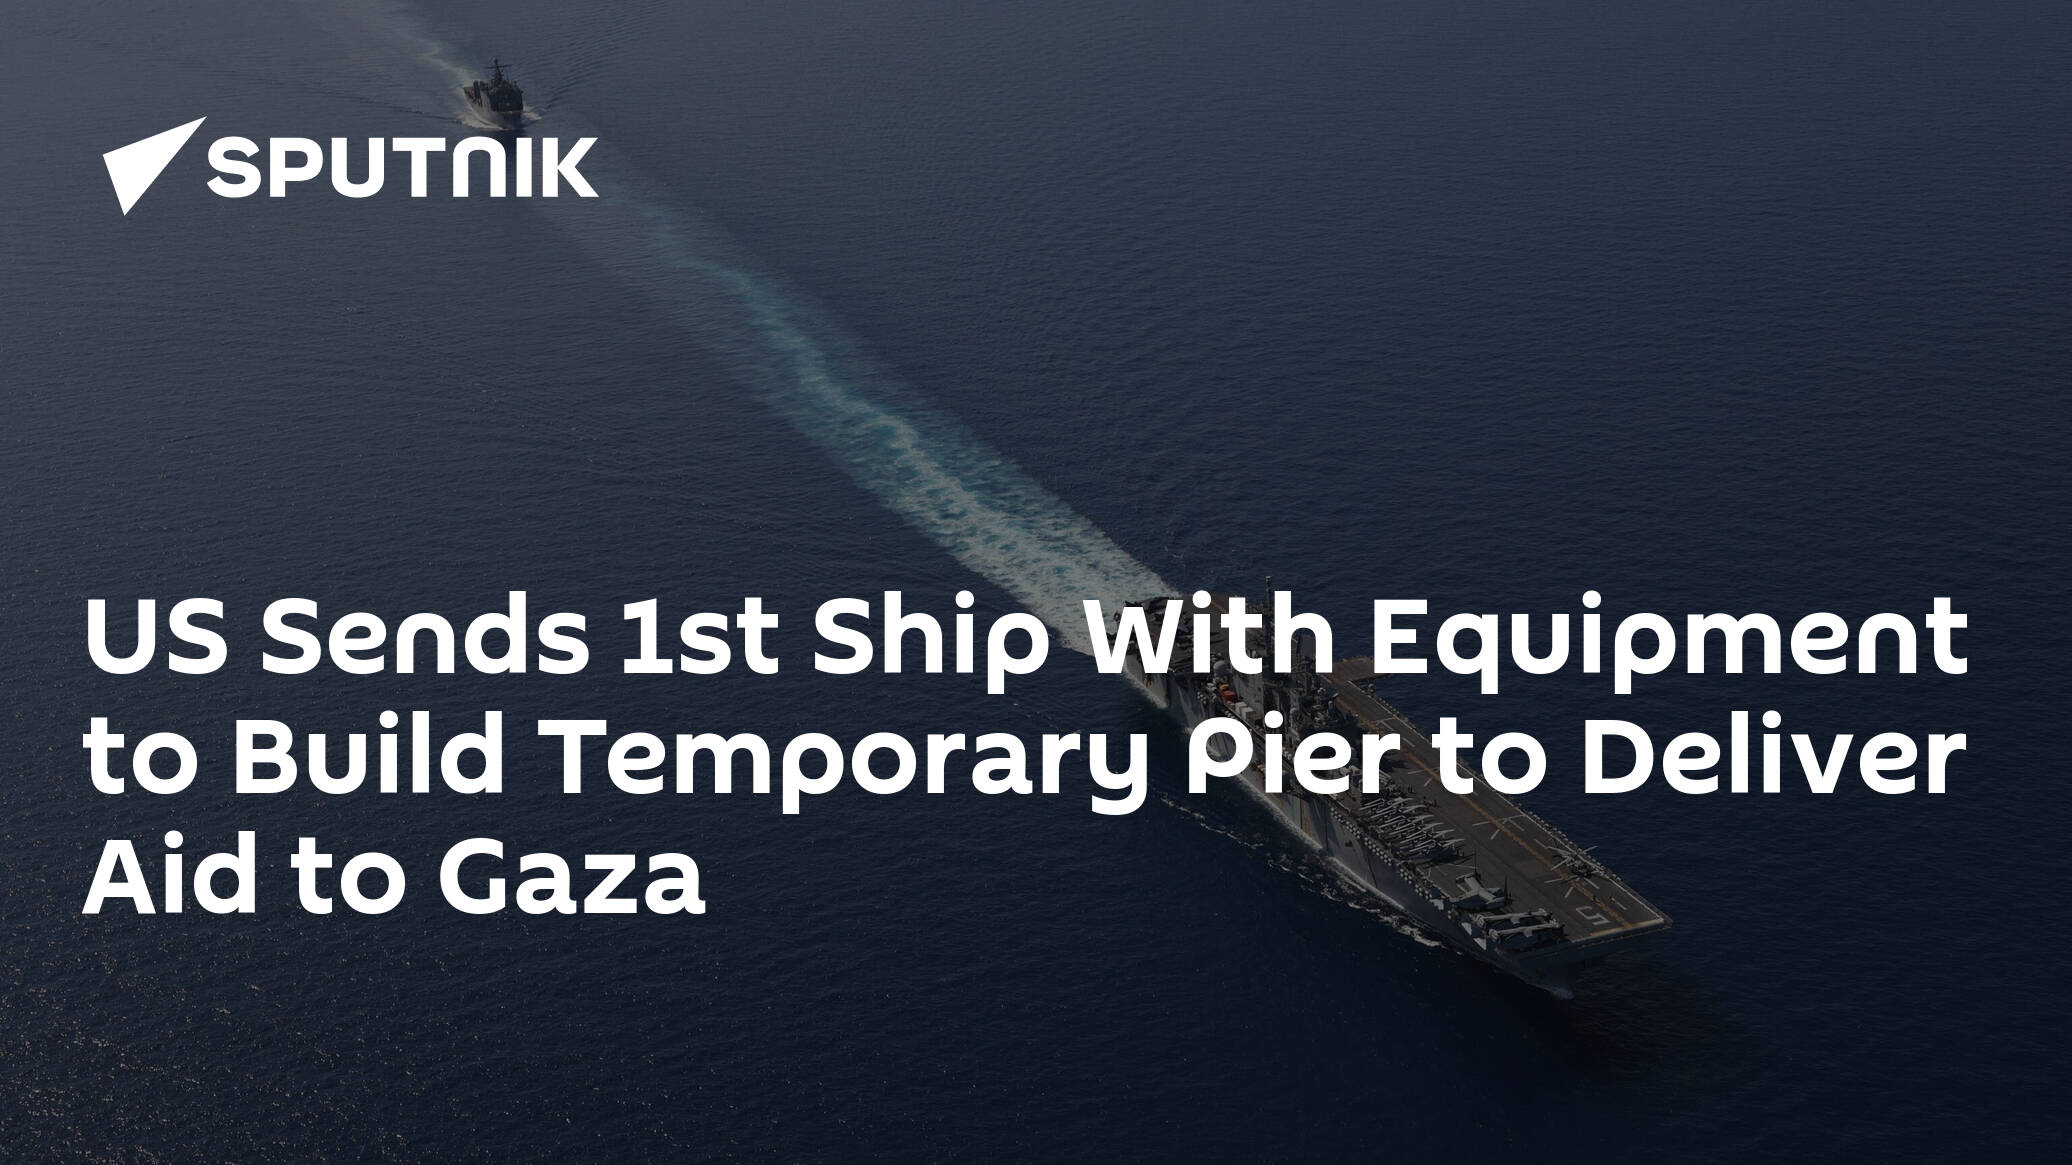 US Sends 1st Ship With Equipment to Build Temporary Pier to Deliver Aid to Gaza